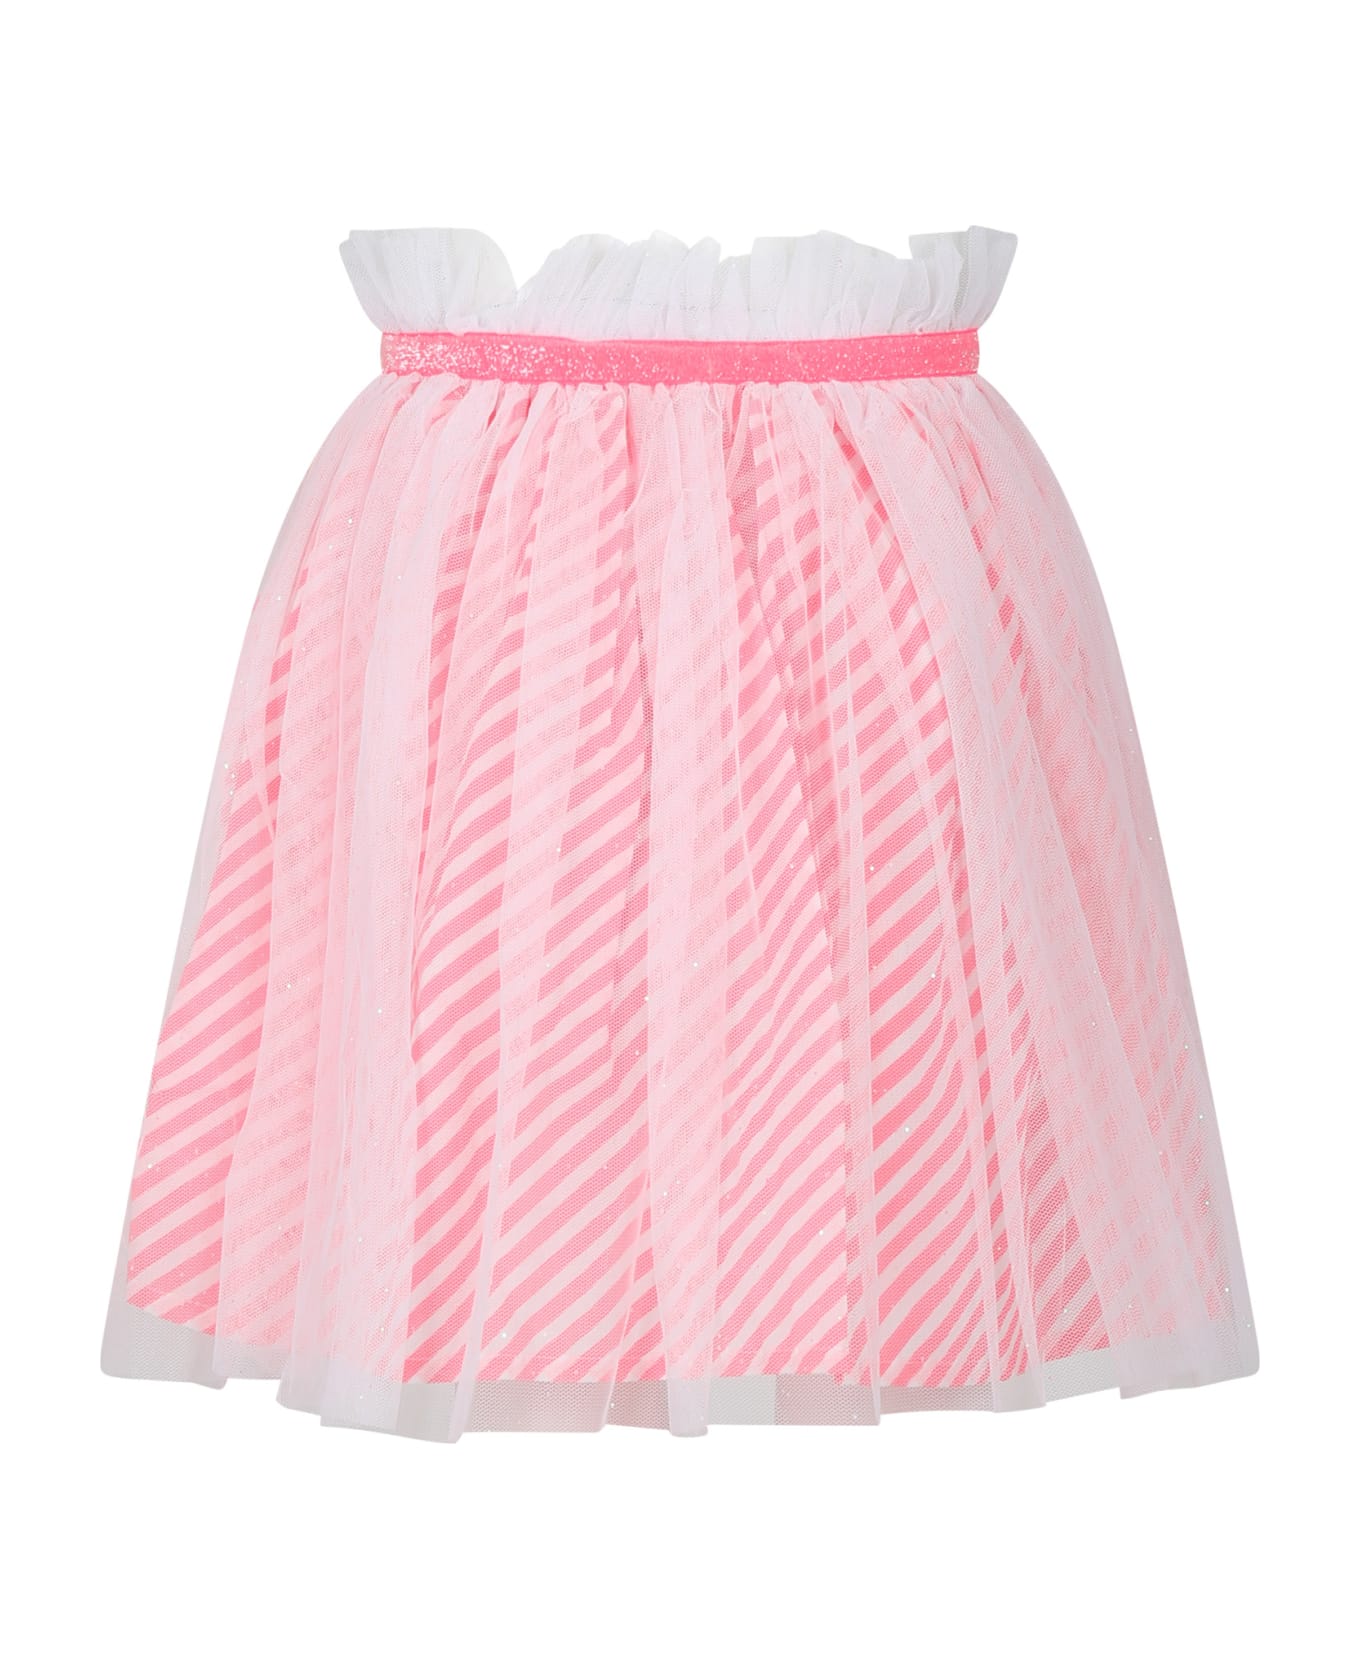 Billieblush White Skirt For Girl With Pattern - Pink ボトムス